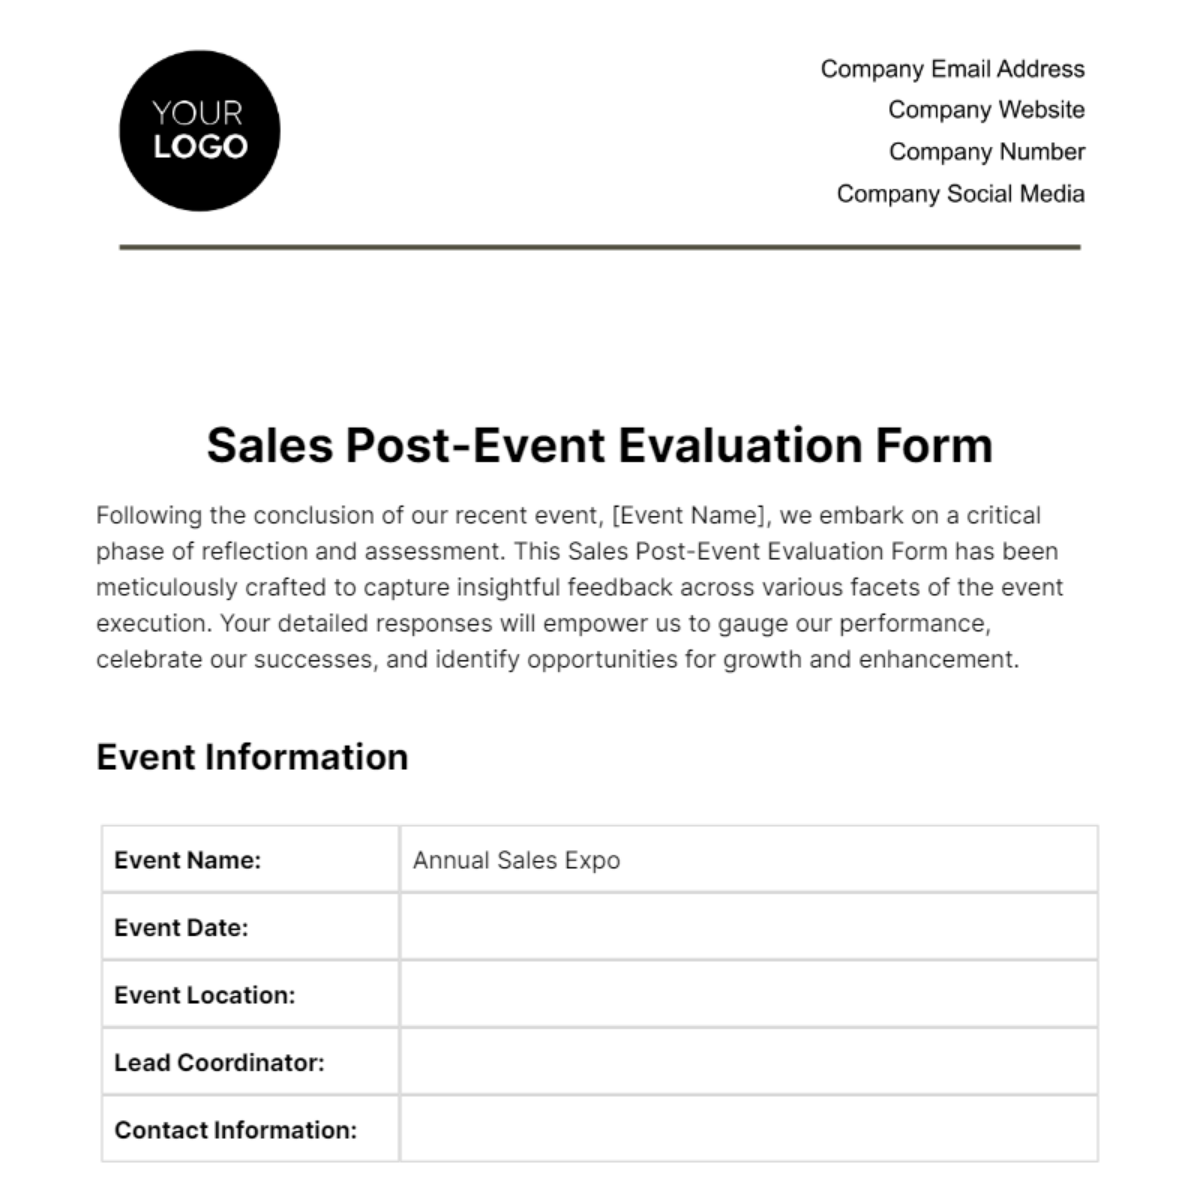 Free Sales Post-Event Evaluation Form Template